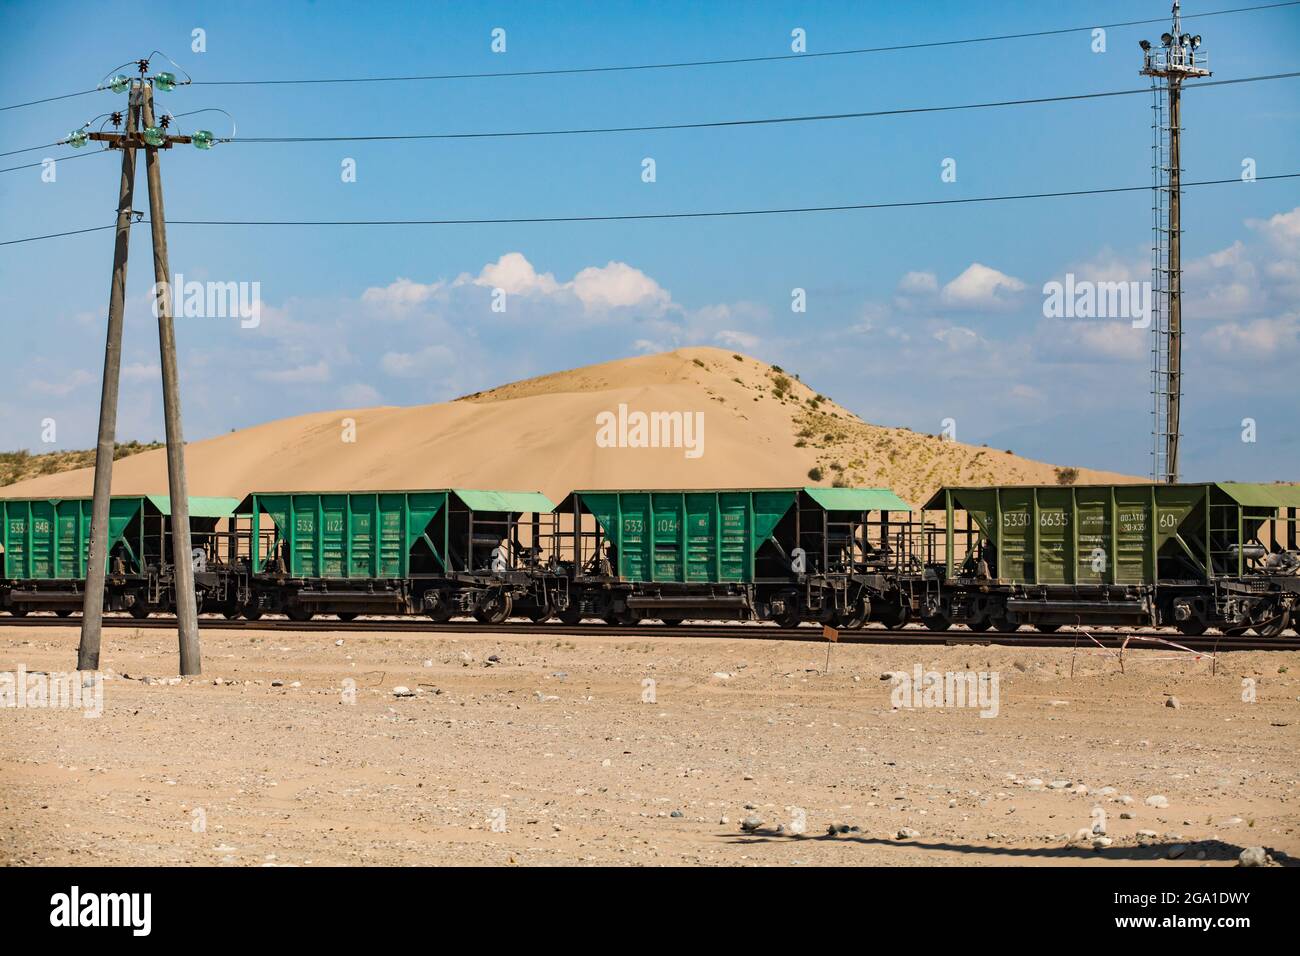 Altynkol, Kazakhstan - June 05, 2012: Railway station Altynkol. Hopper cars train on yellow sand dune and blue sky with clouds backdrop. Stock Photo